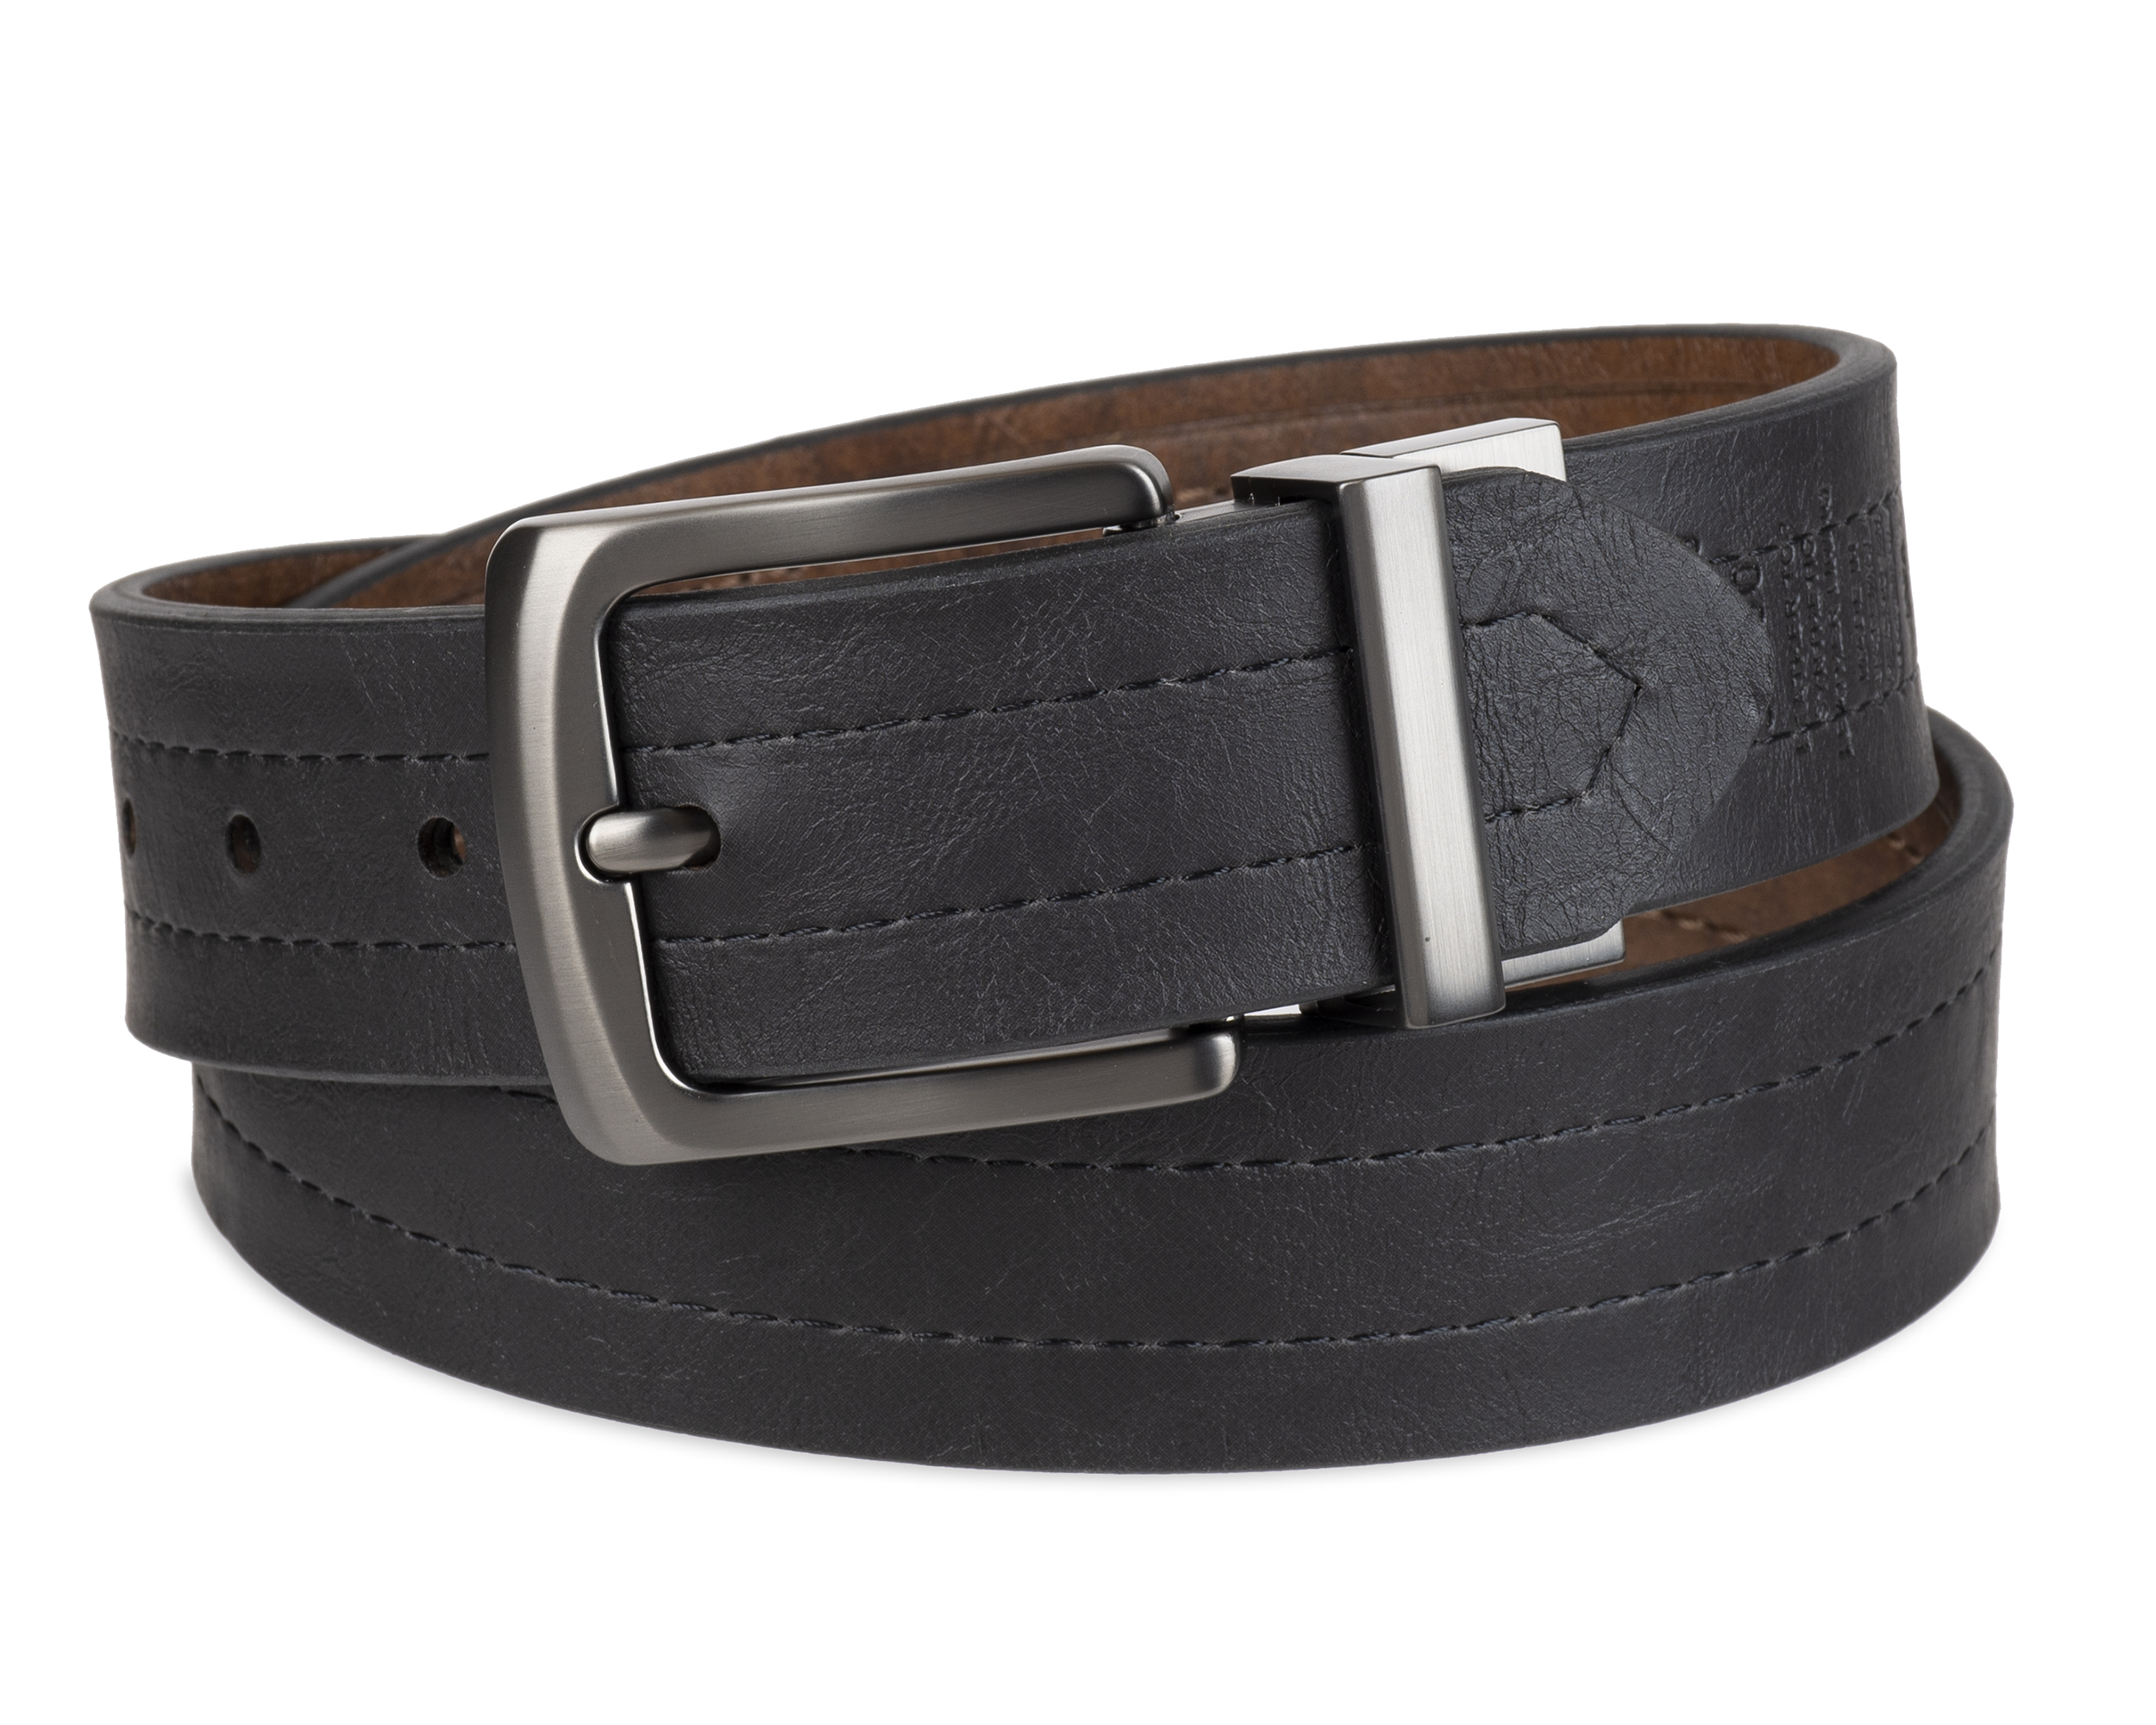 Levi's Men's Two-in-One Reversible Casual Belt, Brown/Black - image 2 of 9